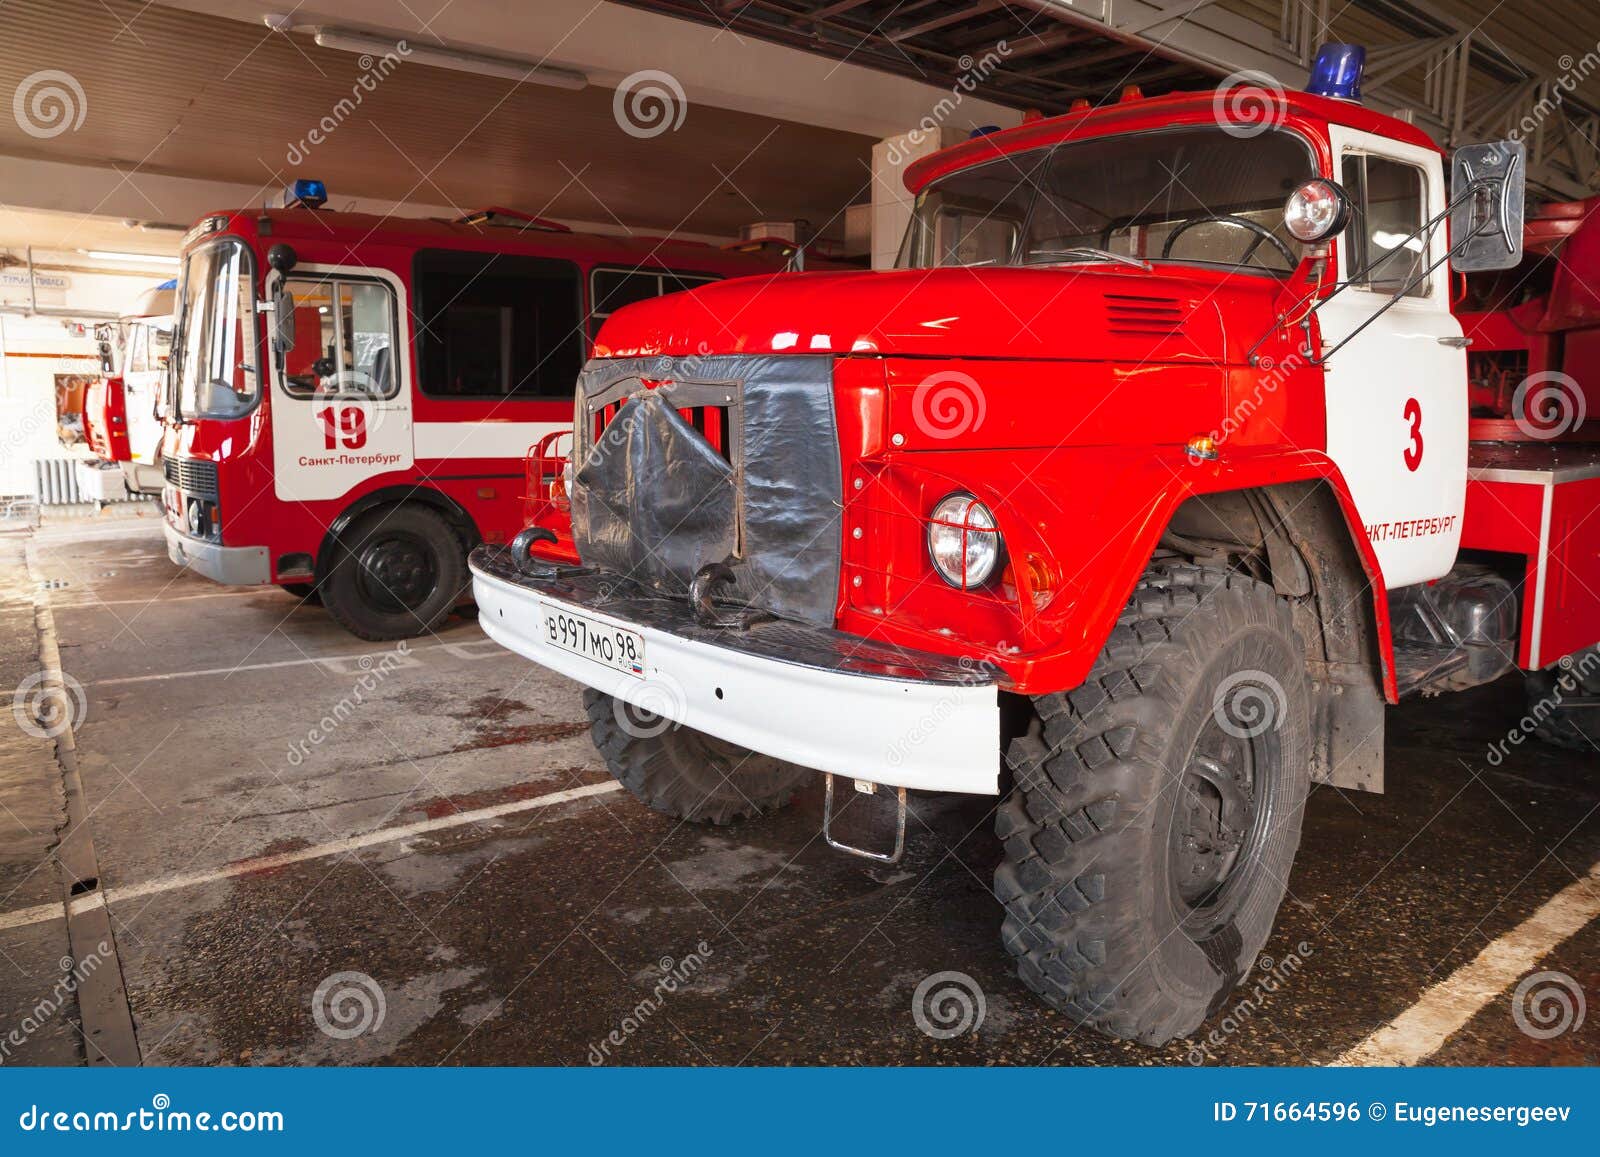 Turntable Ladder Fire Truck AL-30. ZIL 131 Editorial Photo - Image of